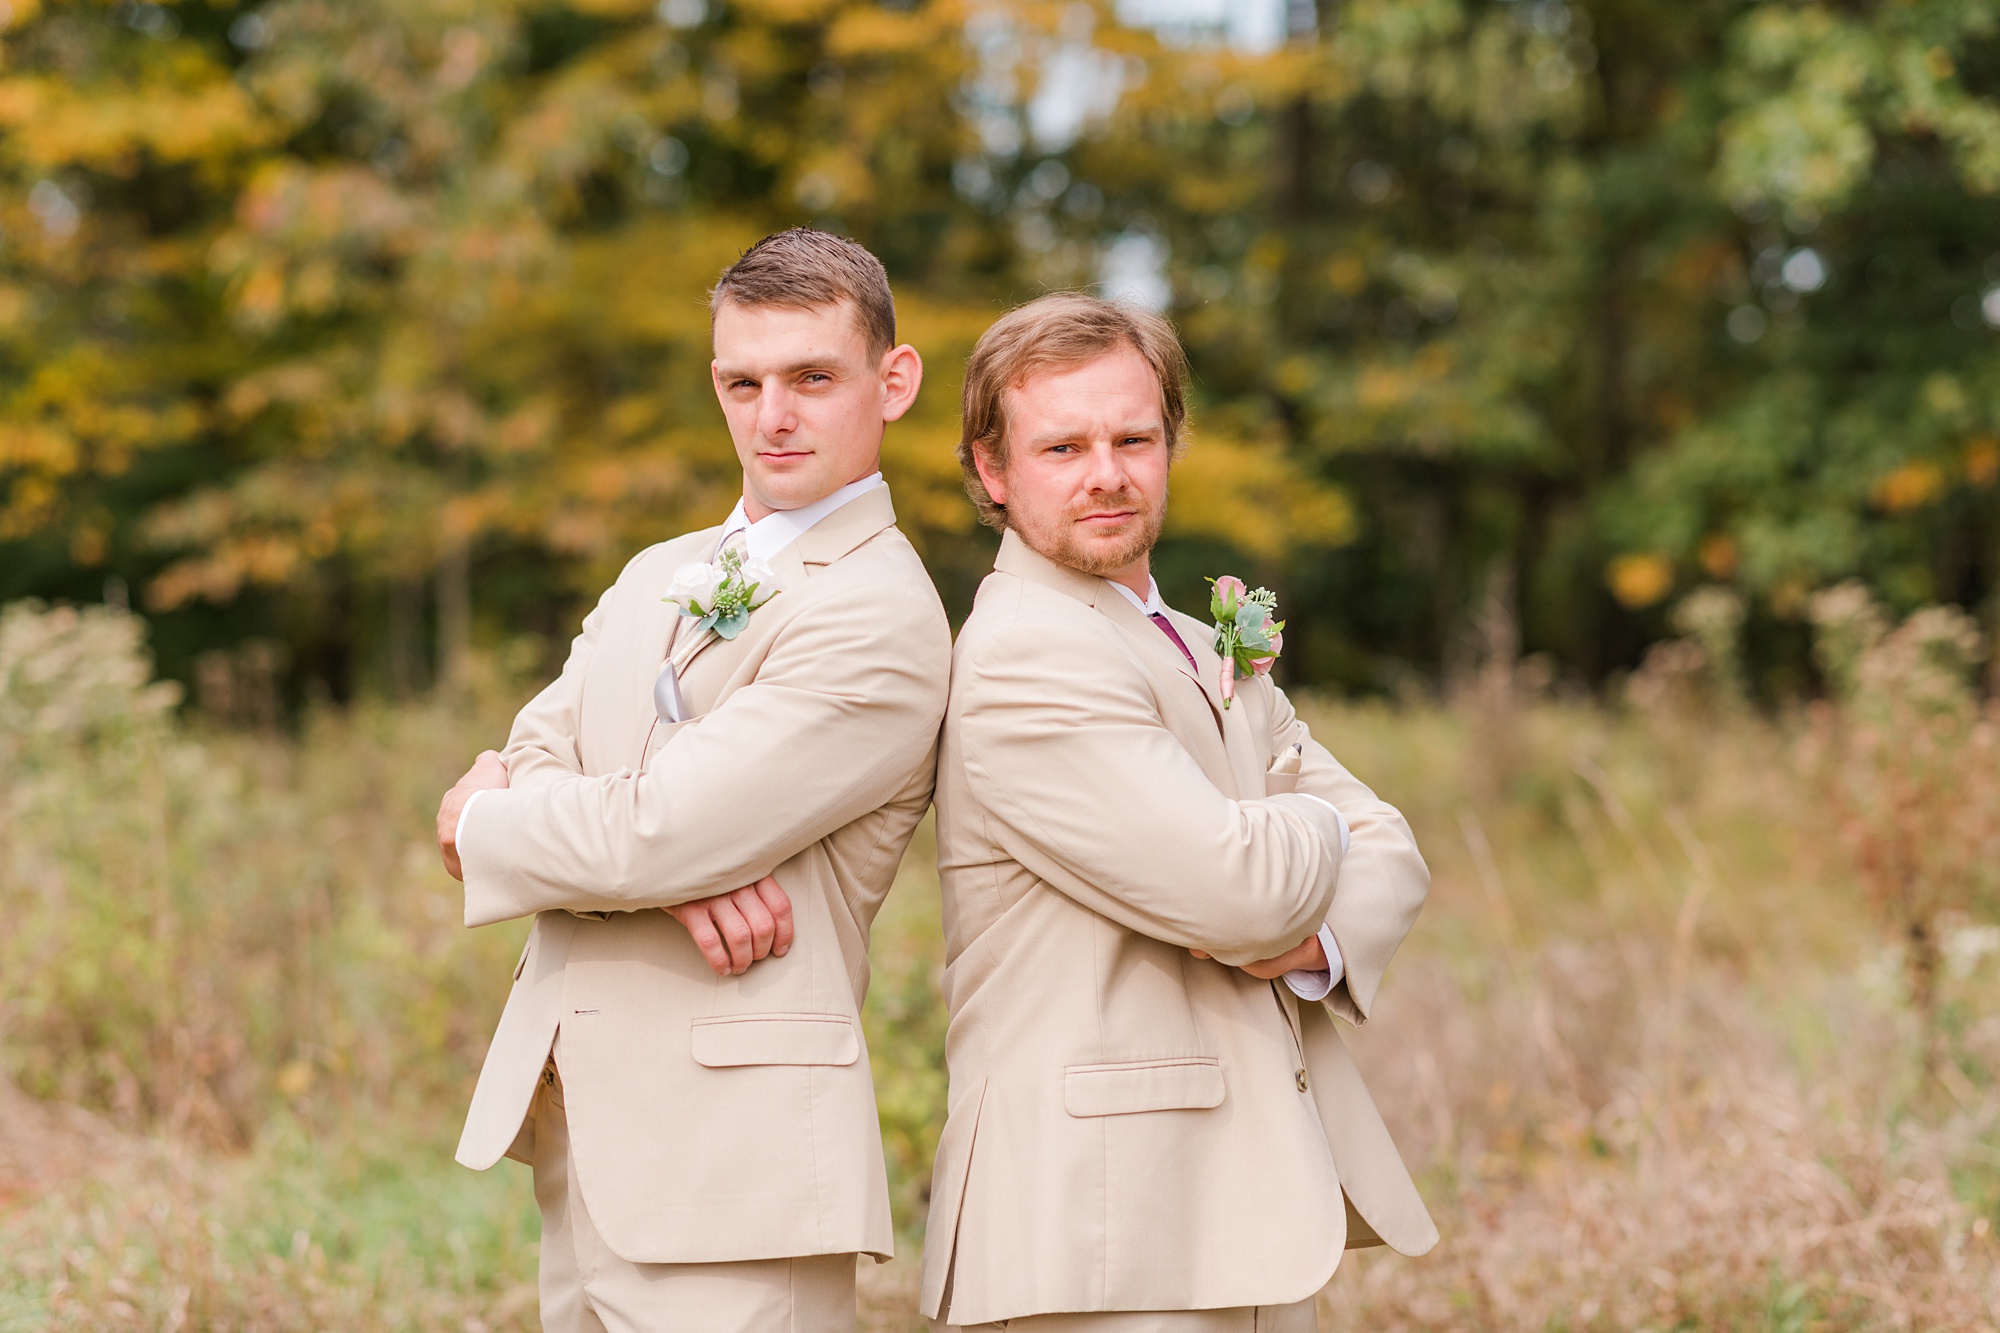 groom and brother pose back to back in tan suits